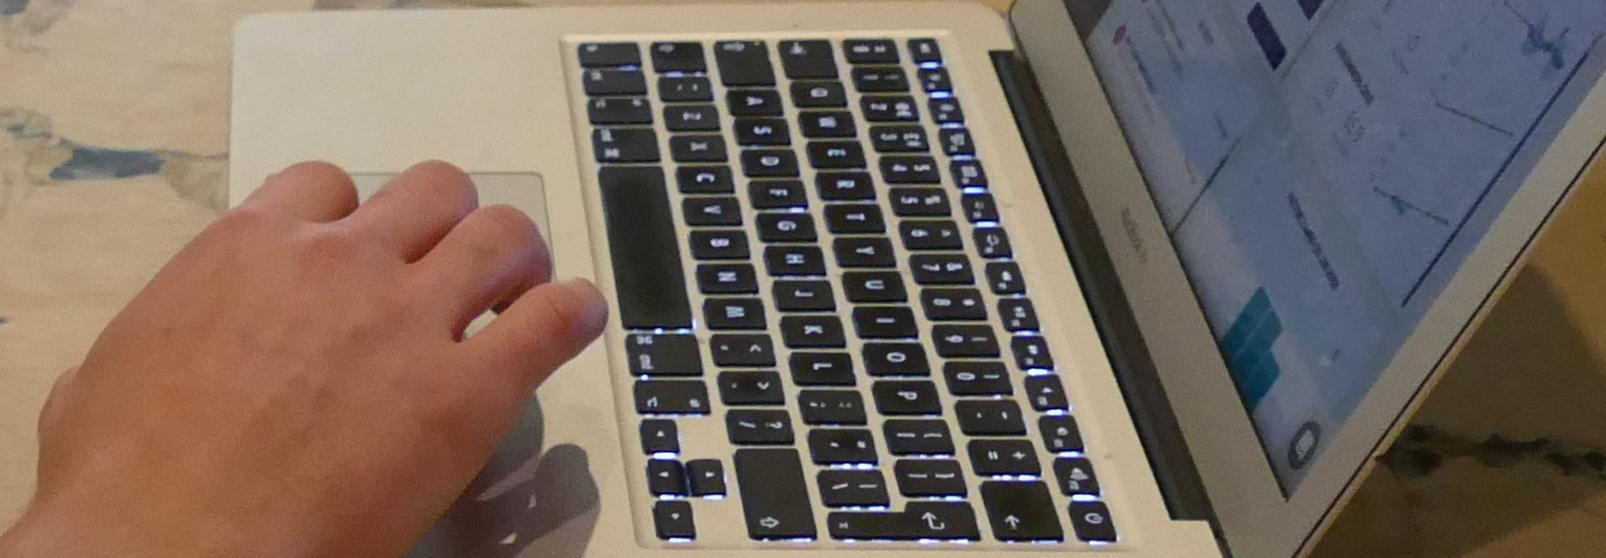 Laptop with hand typing